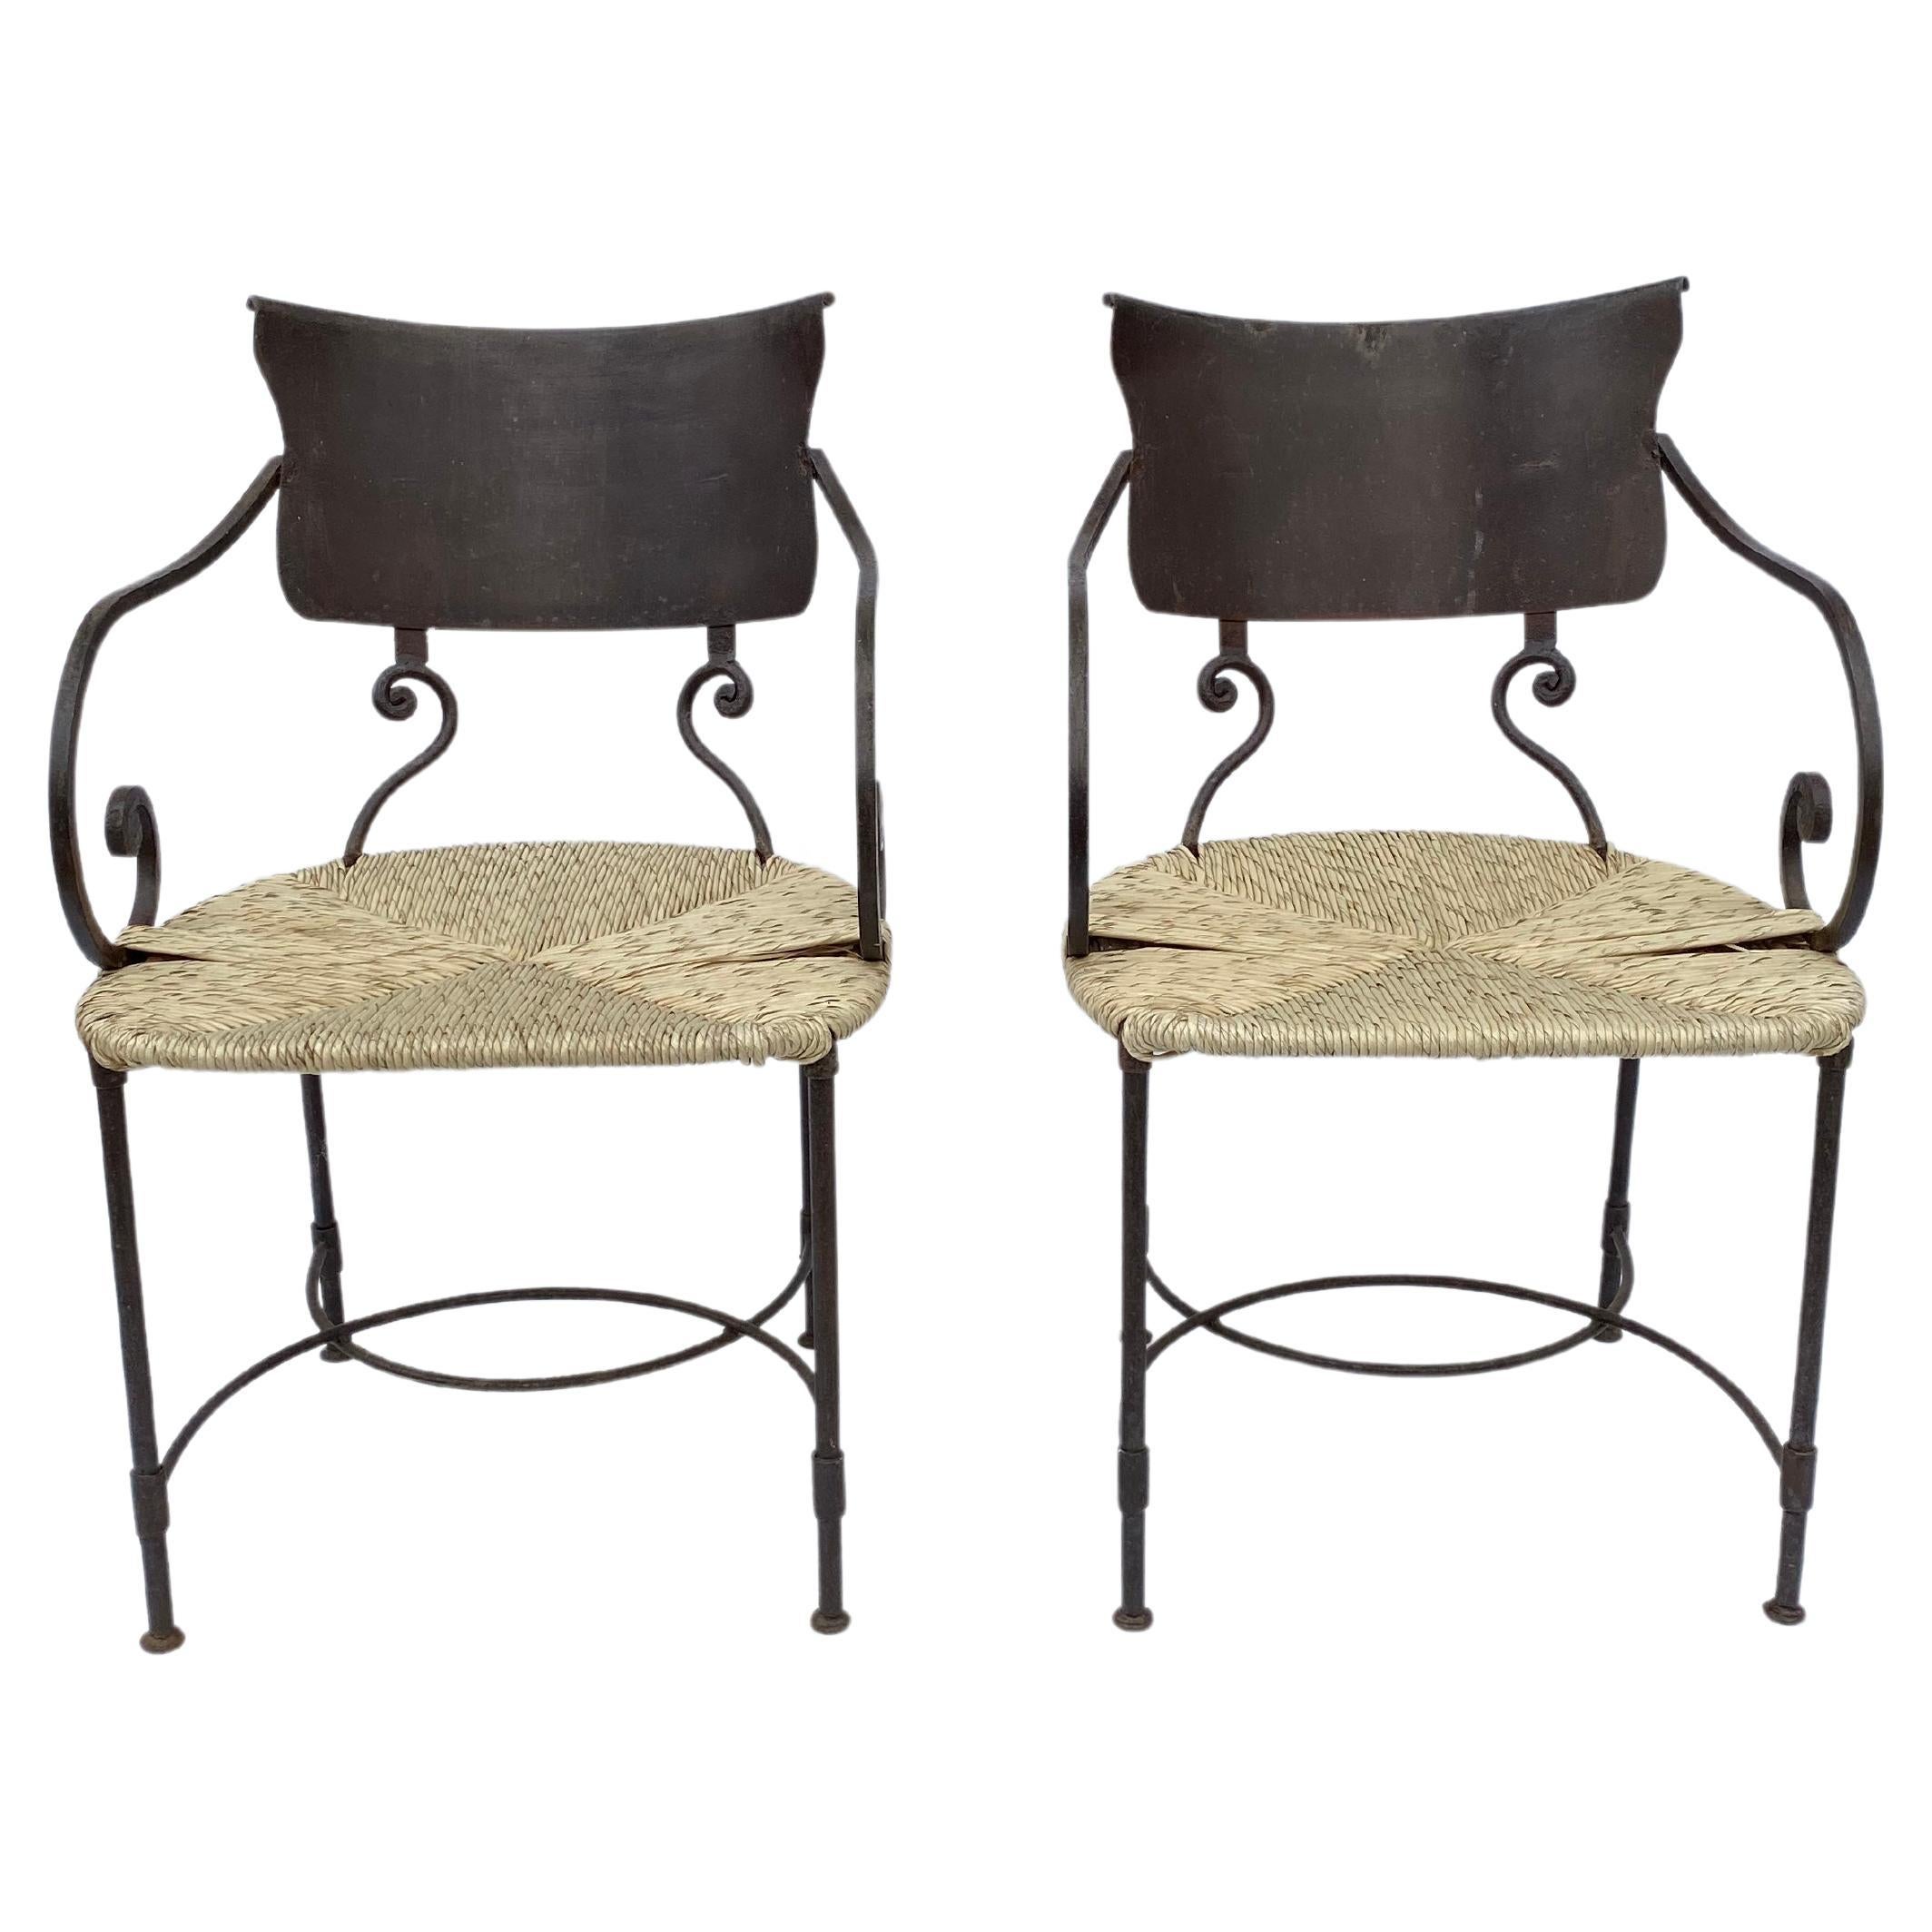 Pair of Art Deco Oxidised Forged Iron Bamboo Rattan Side Chairs Vintage 1920s  In Good Condition For Sale In London, GB